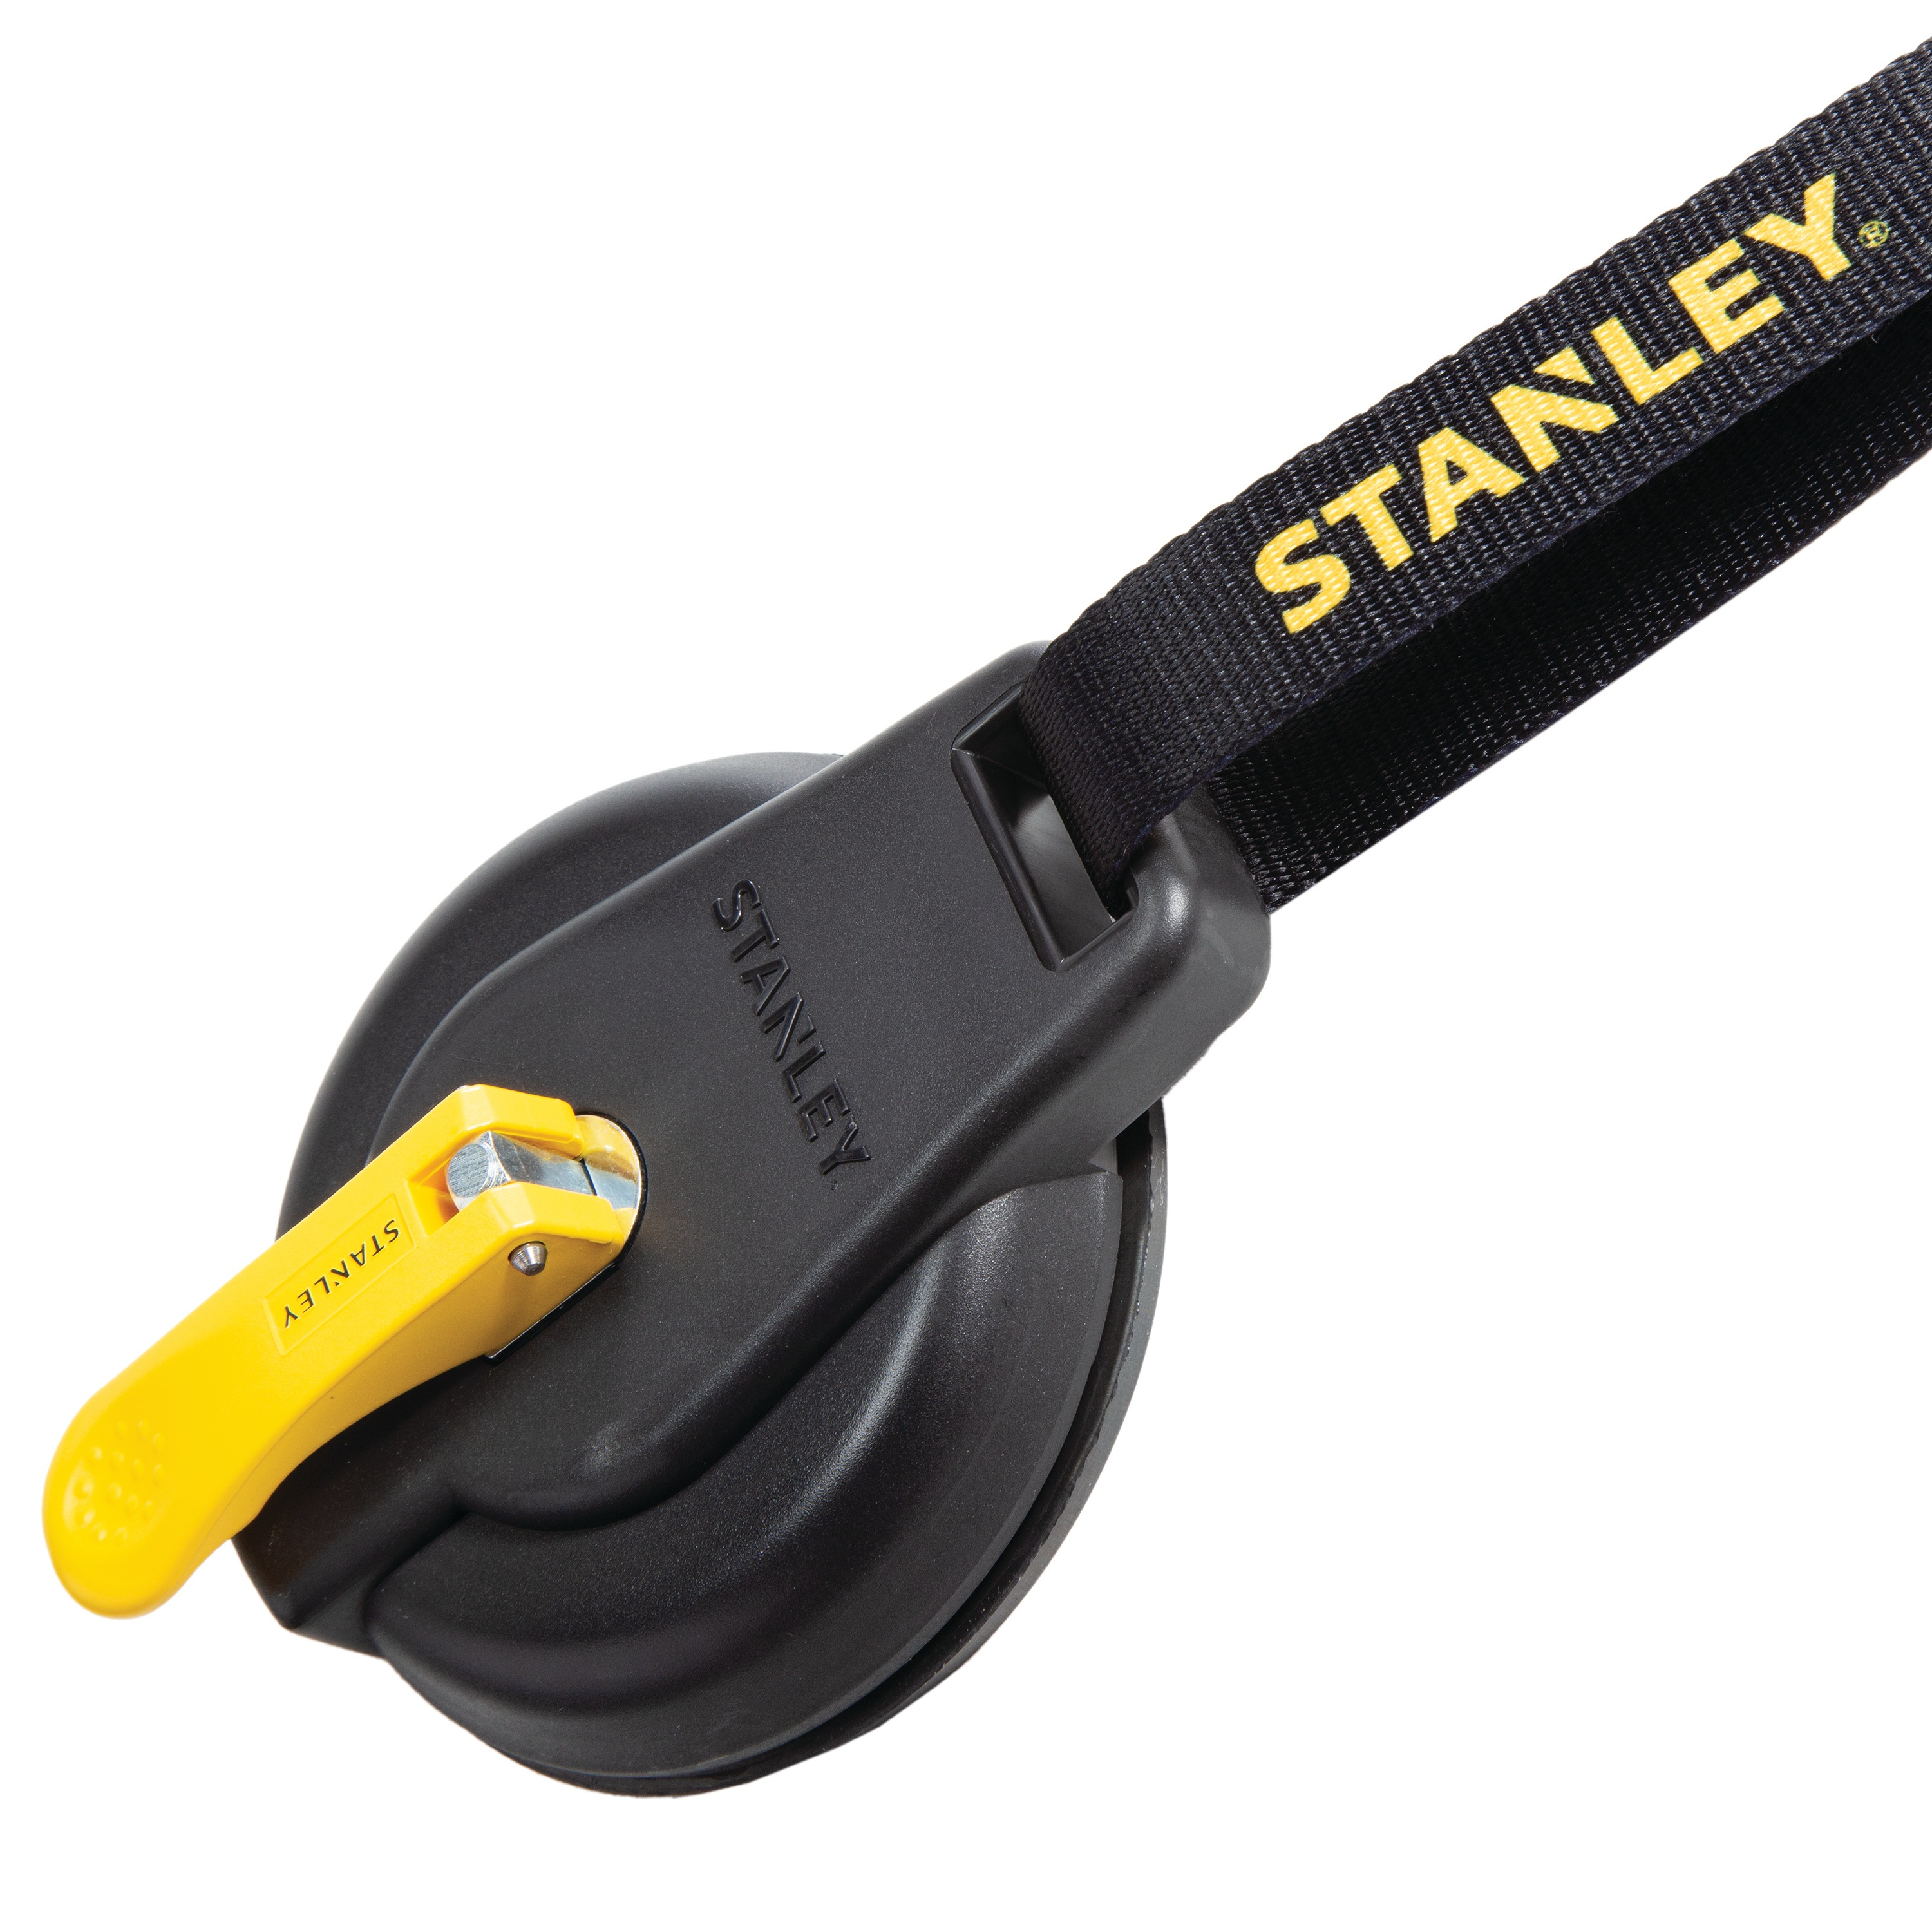 Stanley Tools - HeavyDuty Vacuum Mount Suction Cup - S4004